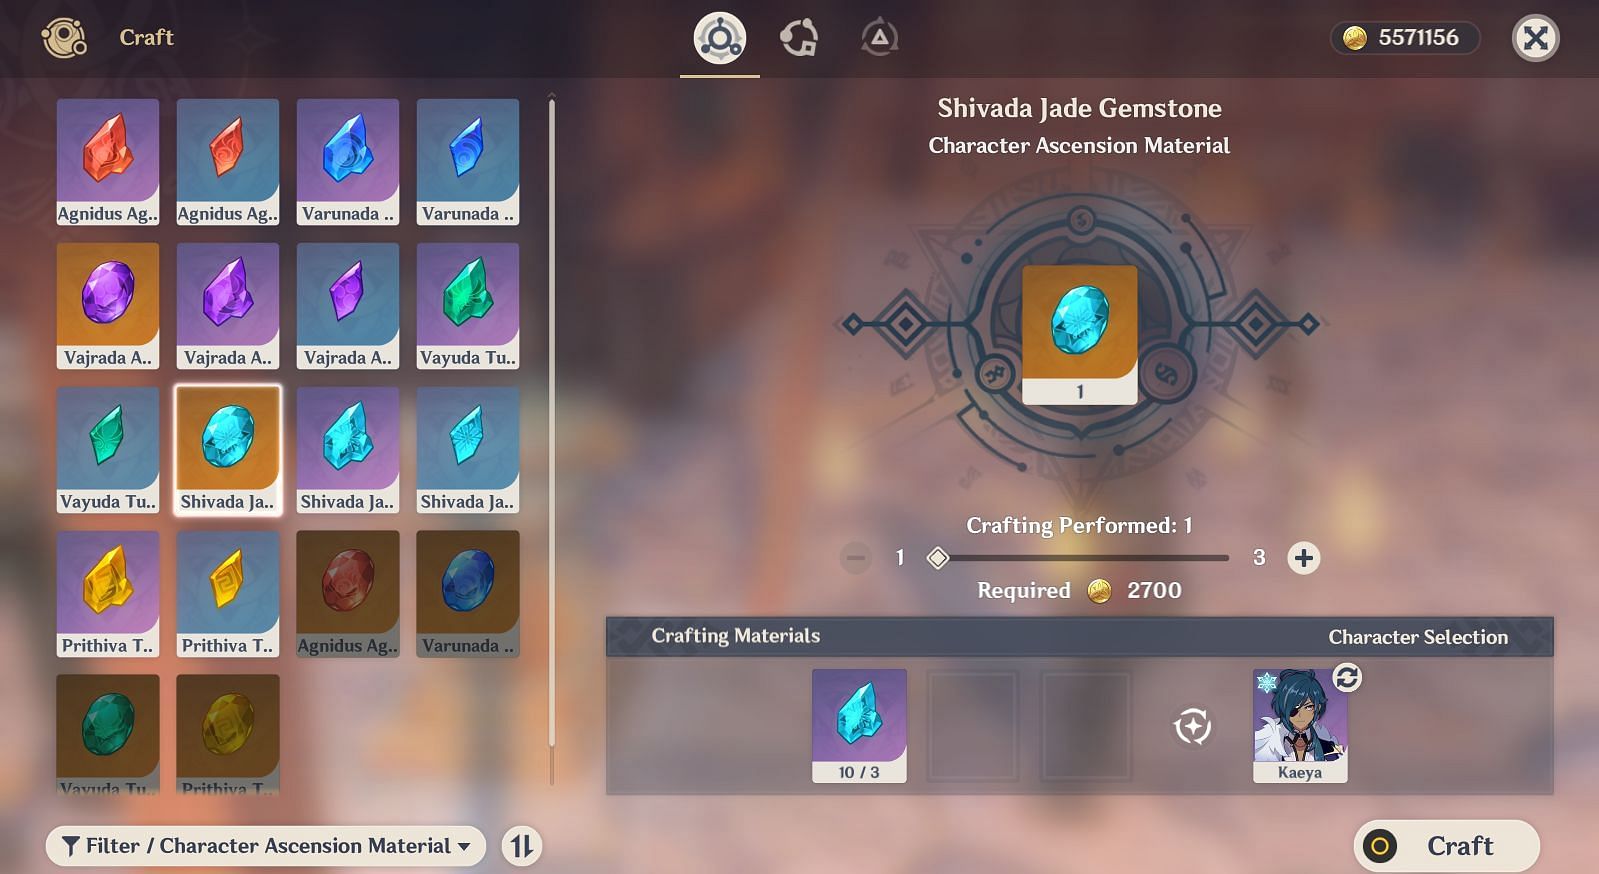 One can craft Shivada Jade materials from the crafting bench(Image via Genshin Impact)